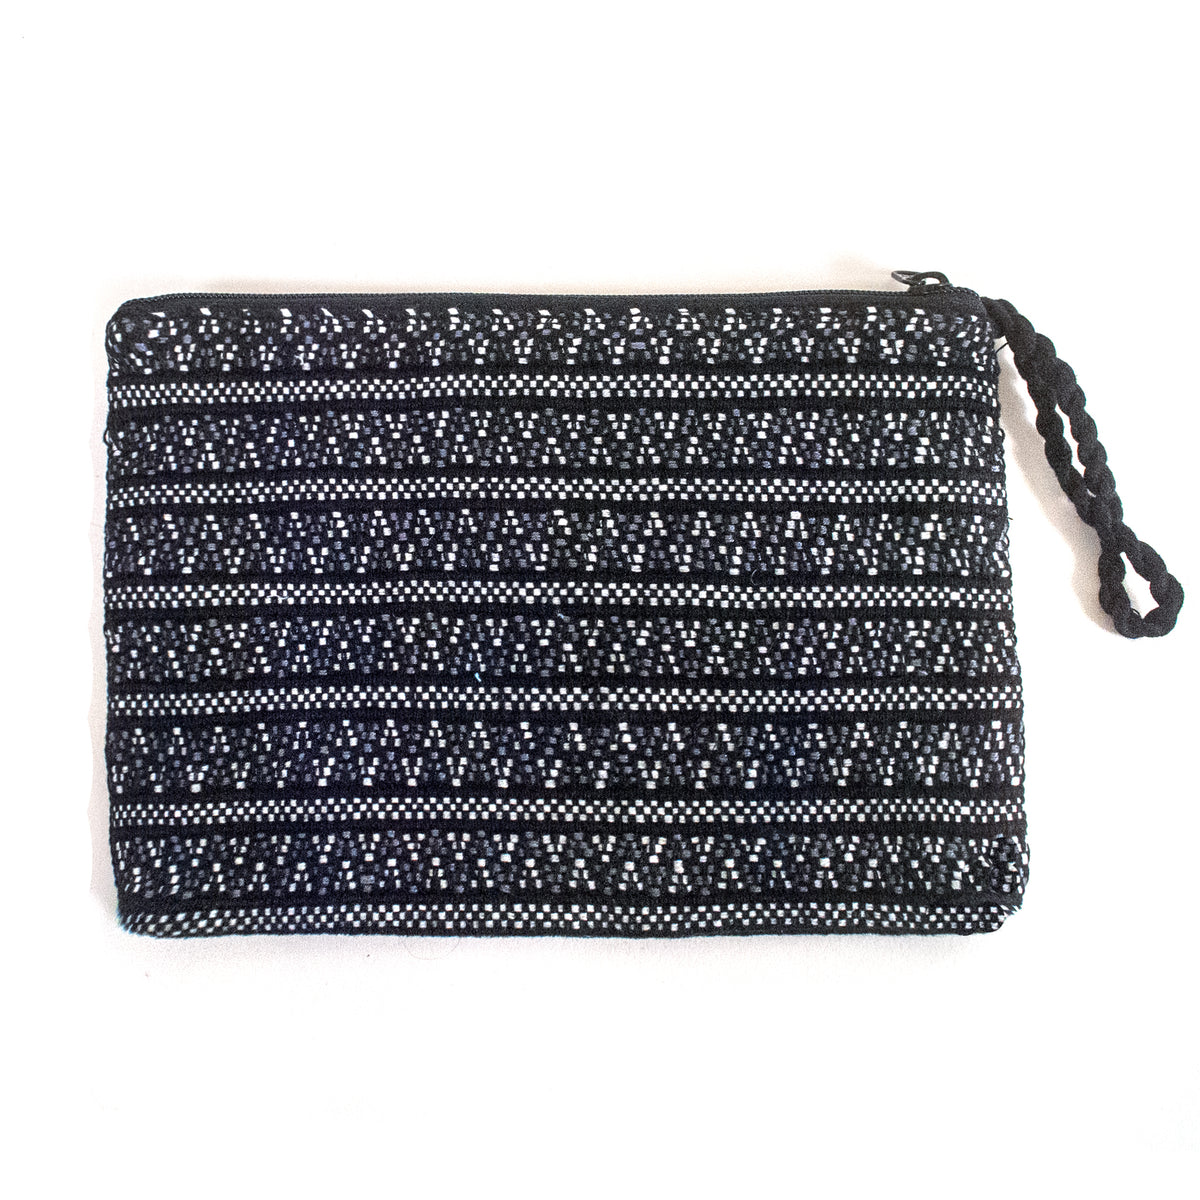 handwoven brocade cosmetic bag black and white | Mayan Hands